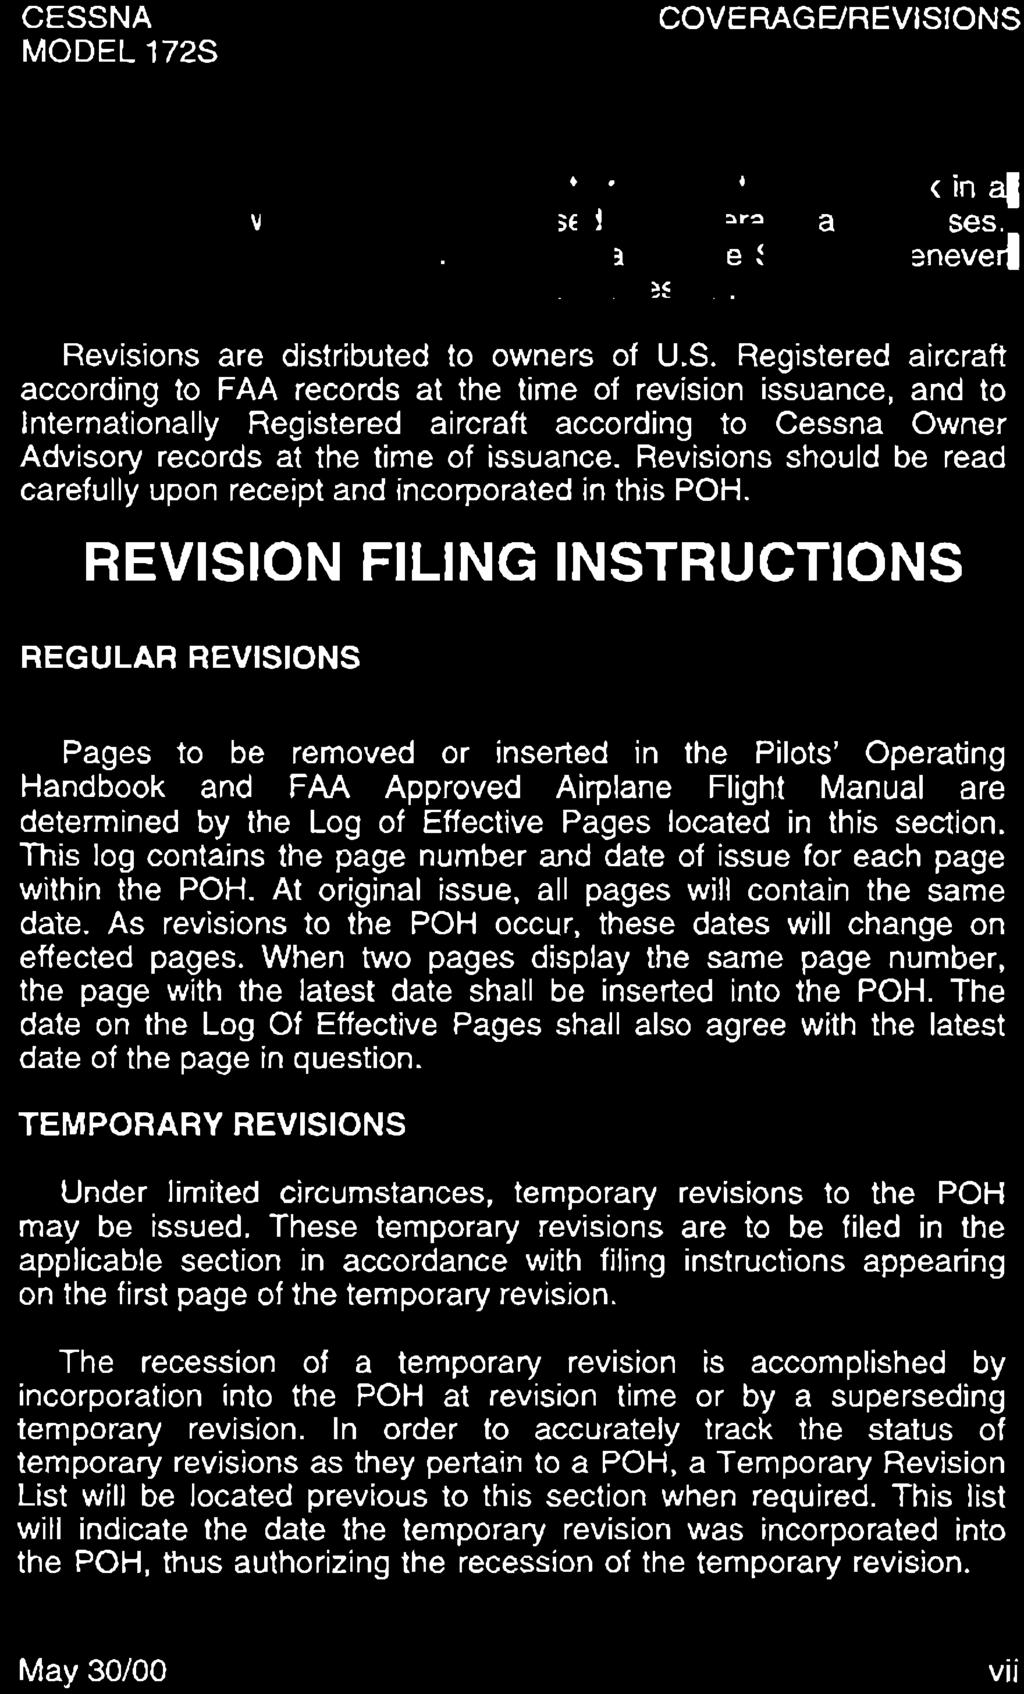 rvice Station whenever! the revision status of their handbook is in questio.jl. Revisions are distributed to owners of U.S. Registered aircraft according to FAA records at the time of revision issuance, and to Internationally Registered aircraft according to Cessna Owner Advisory records at the time of issuance.